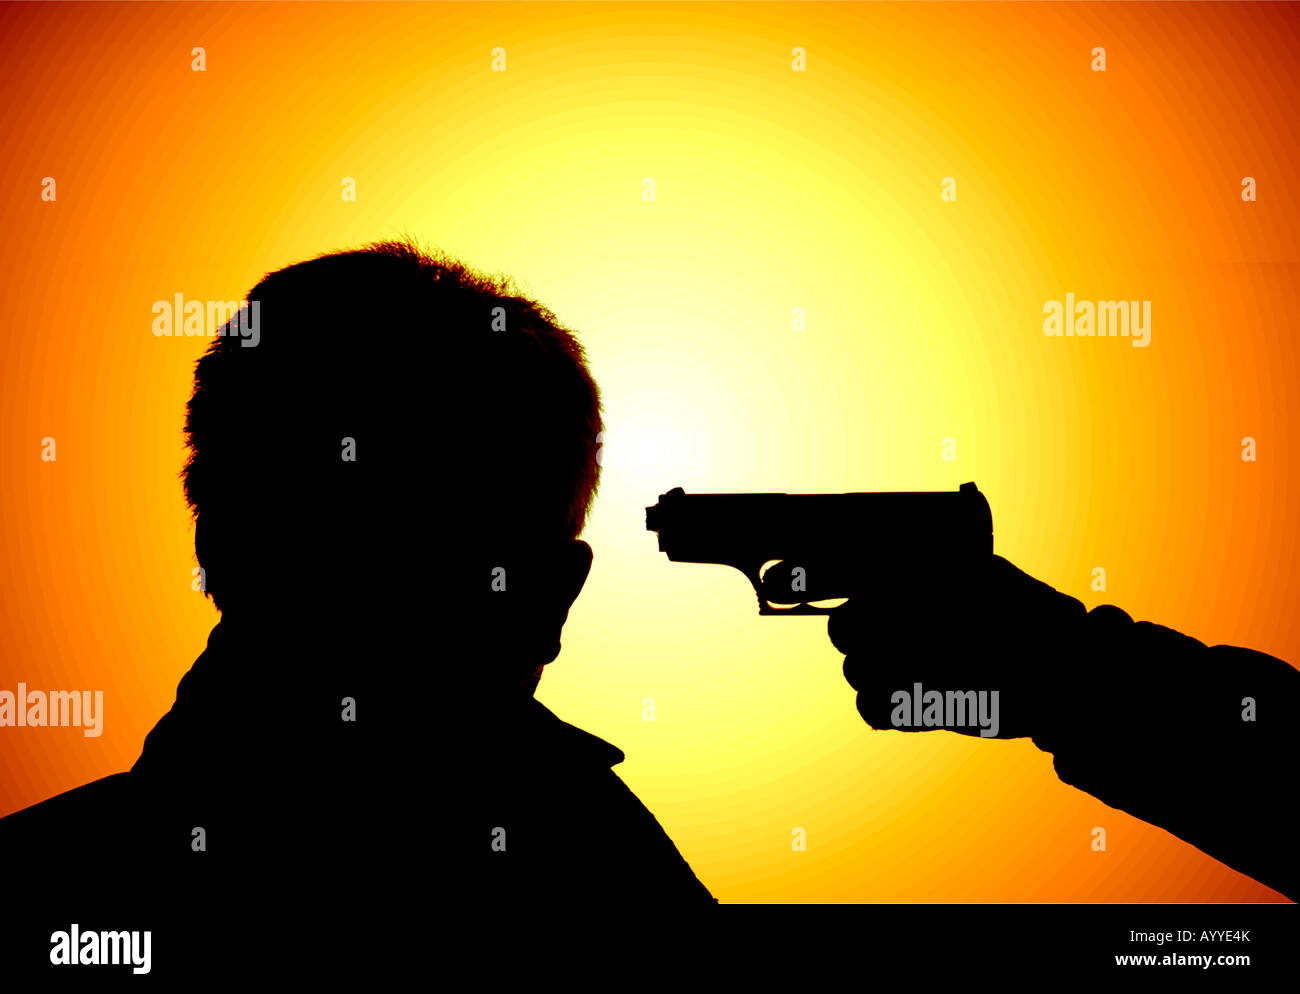 silhouette of hand gun pointed at head of man Stock Photo